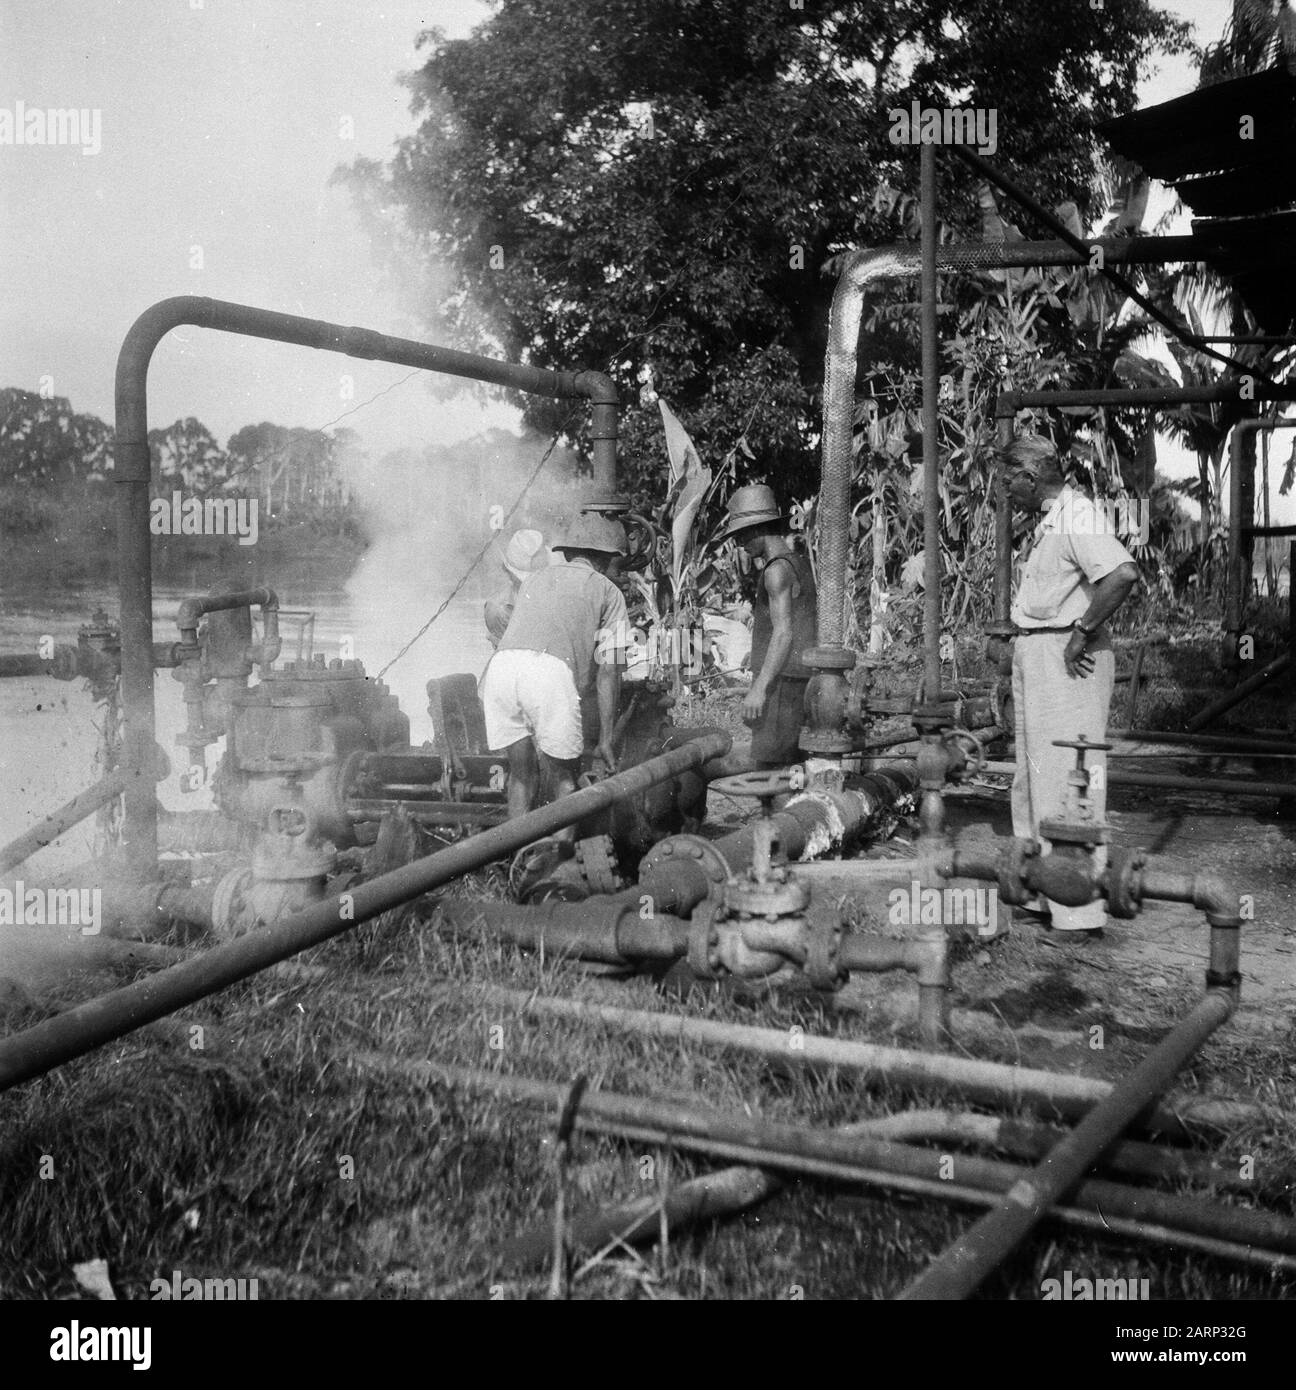 [An installation near a river] Date: 1947/01/01 Location: Indonesia, Dutch East Indies Stock Photo